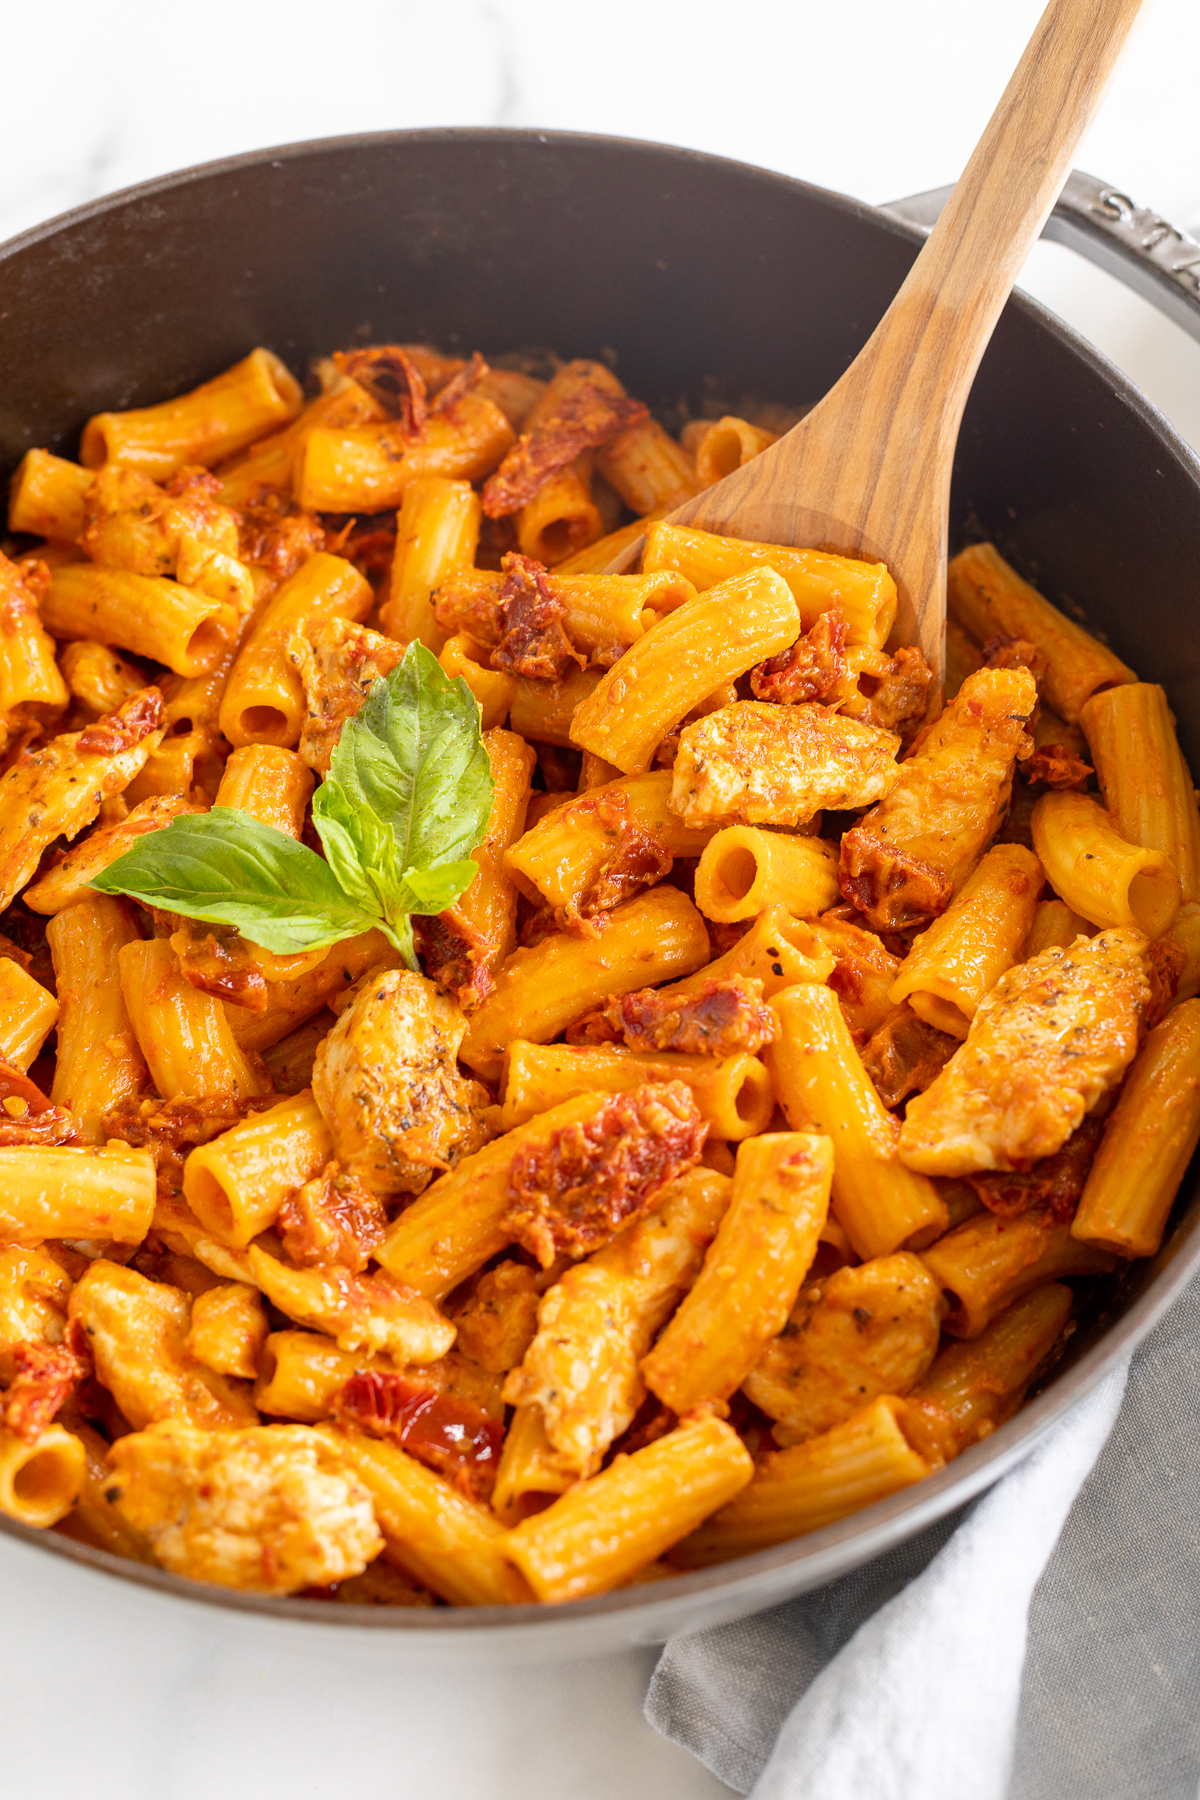 A saute pan filled with a sundried tomato chicken pasta recipe